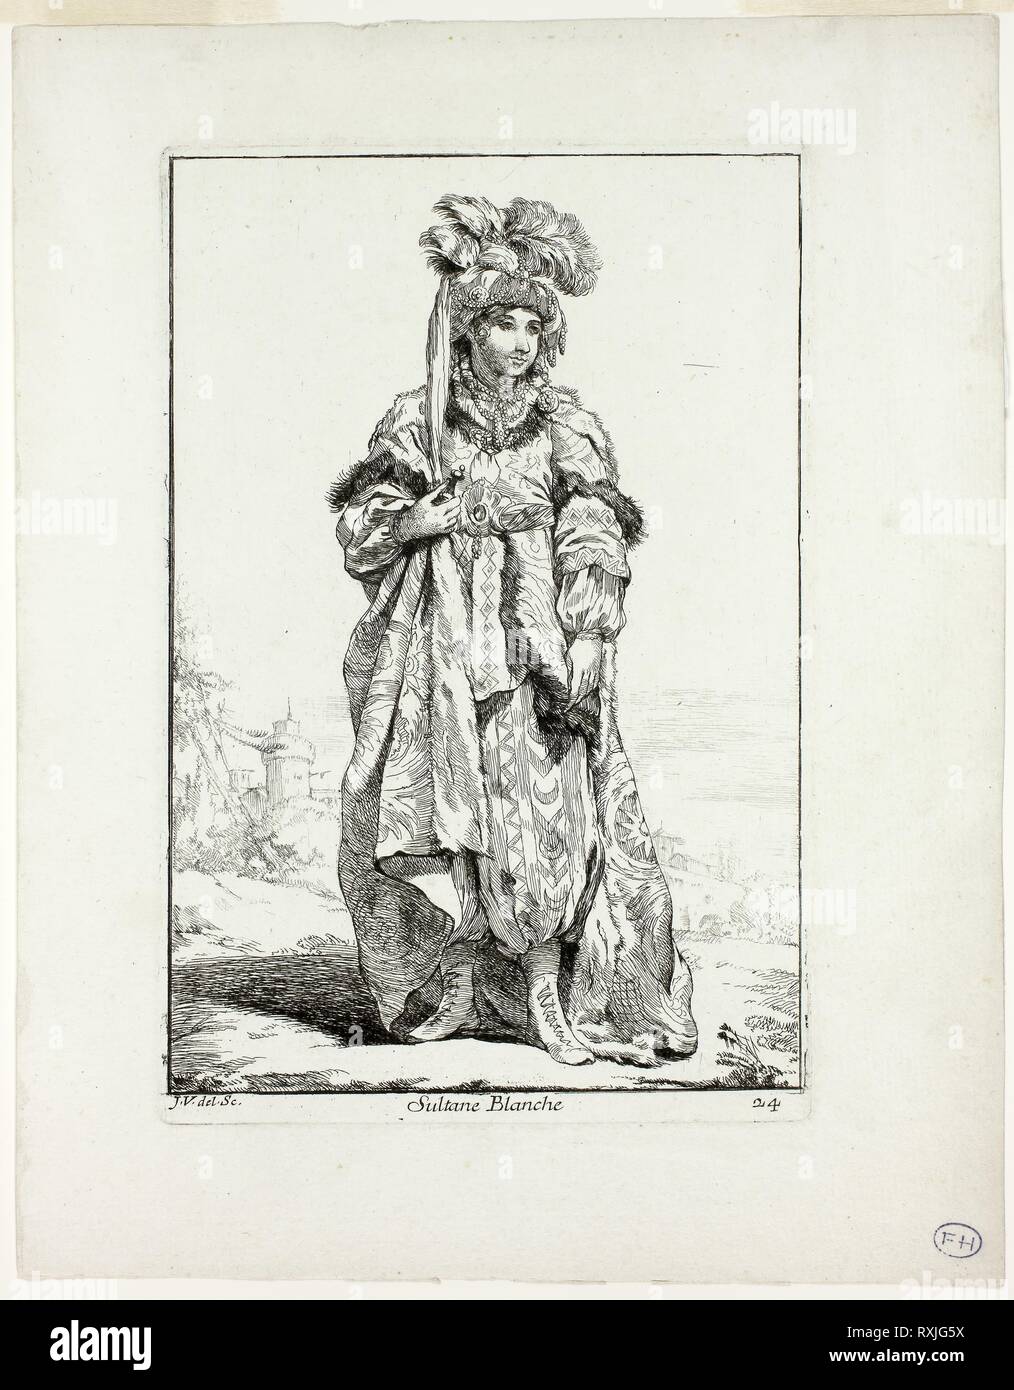 Sultane Blanche, plate 24 from Caravanne du Sultan à la Mecque. Joseph Marie Vien; French, 1716-1809. Date: 1748. Dimensions: 196 × 132 mm (image); 204 × 136 mm (plate); 265 × 206 mm (sheet). Etching on ivory laid paper. Origin: France. Museum: The Chicago Art Institute. Stock Photo